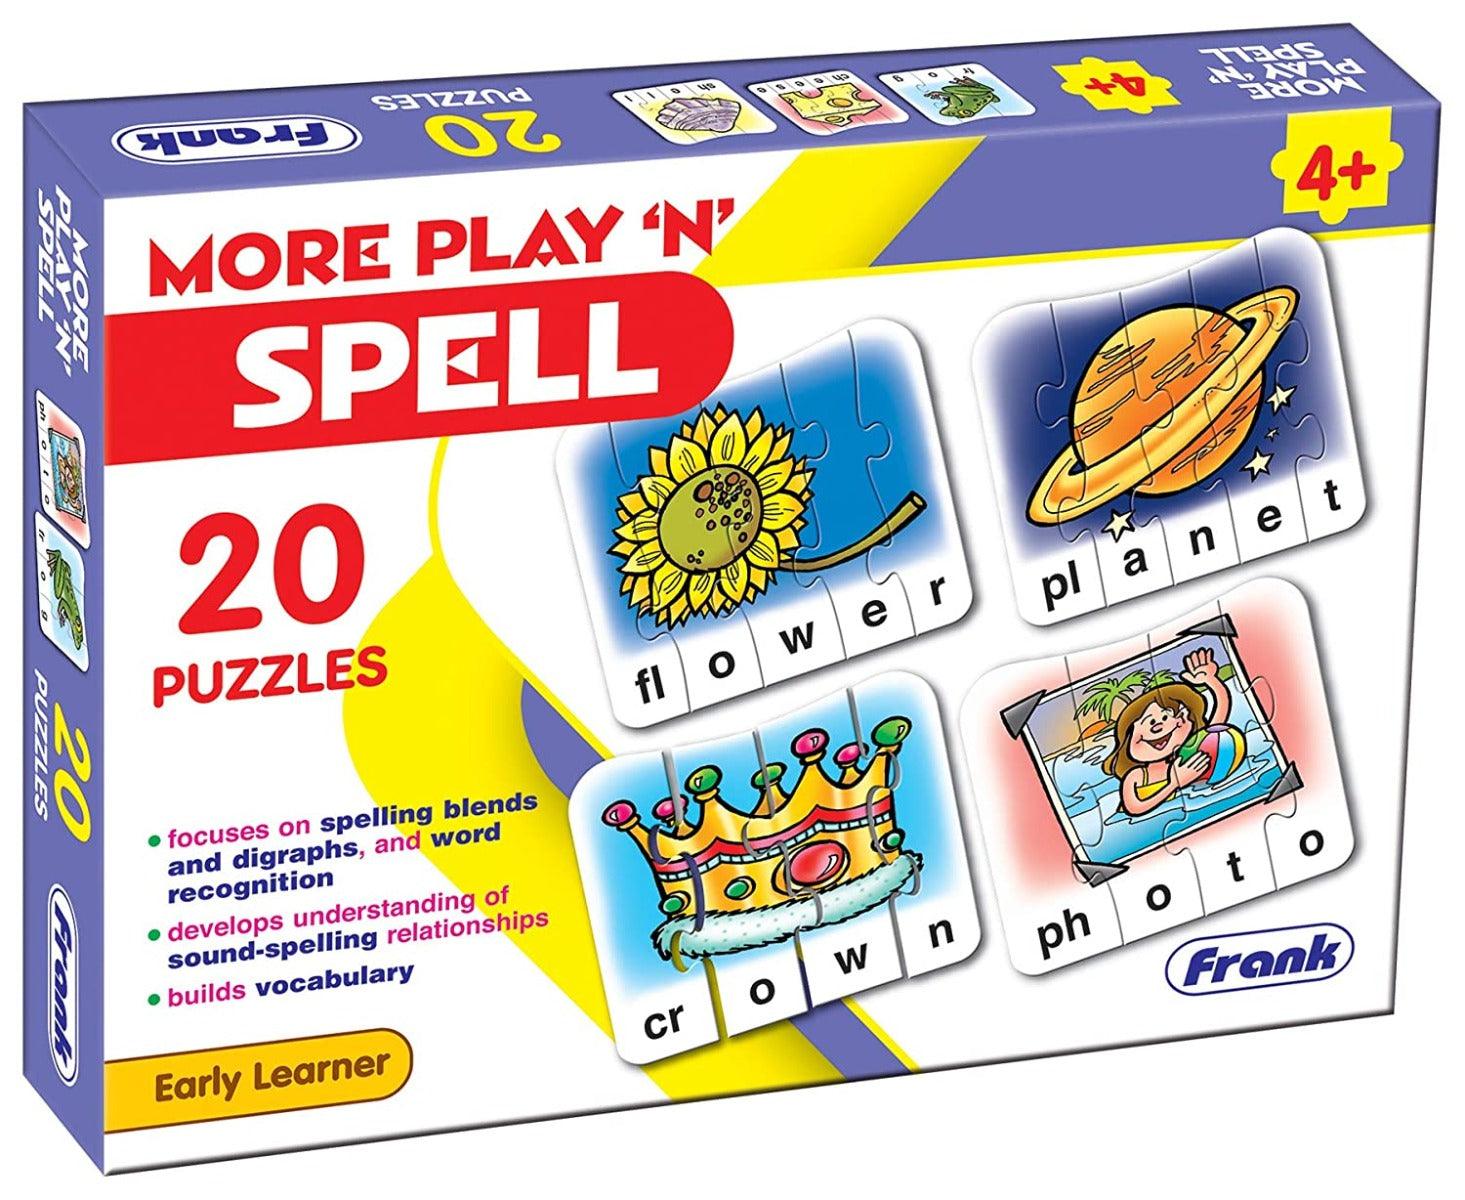 Frank More Play ‚Äö√Ñ√≤n' Spell Puzzle ‚Äö√Ñ√¨ 20 Self-Correcting Puzzles, Early Learner Educational Jigsaw Puzzle Sets with Images